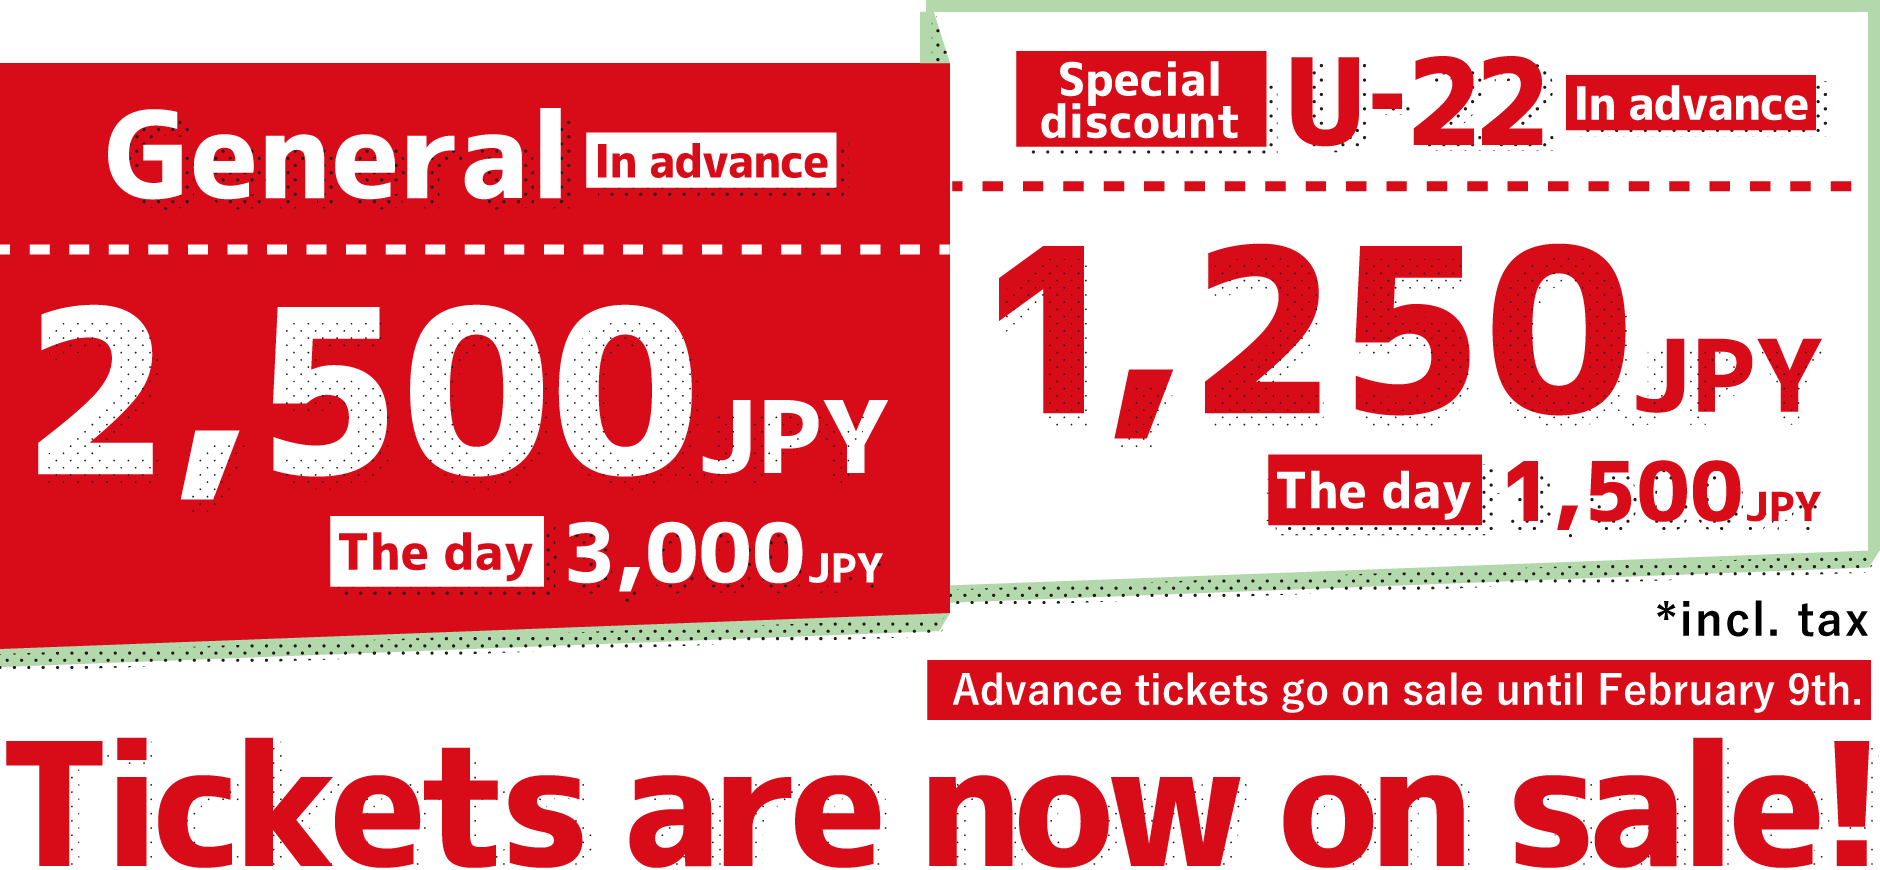 Tickets are now on sale! General ticket: 2,500 JPY (incl. tax) in advance, 3,000 JPY (incl. tax) on the day Special discount ticket (U-22): 1,250 JPY (incl. tax) in advance, 1,500 JPY (incl. tax) on the day Advance tickets go on sale until February 9th.